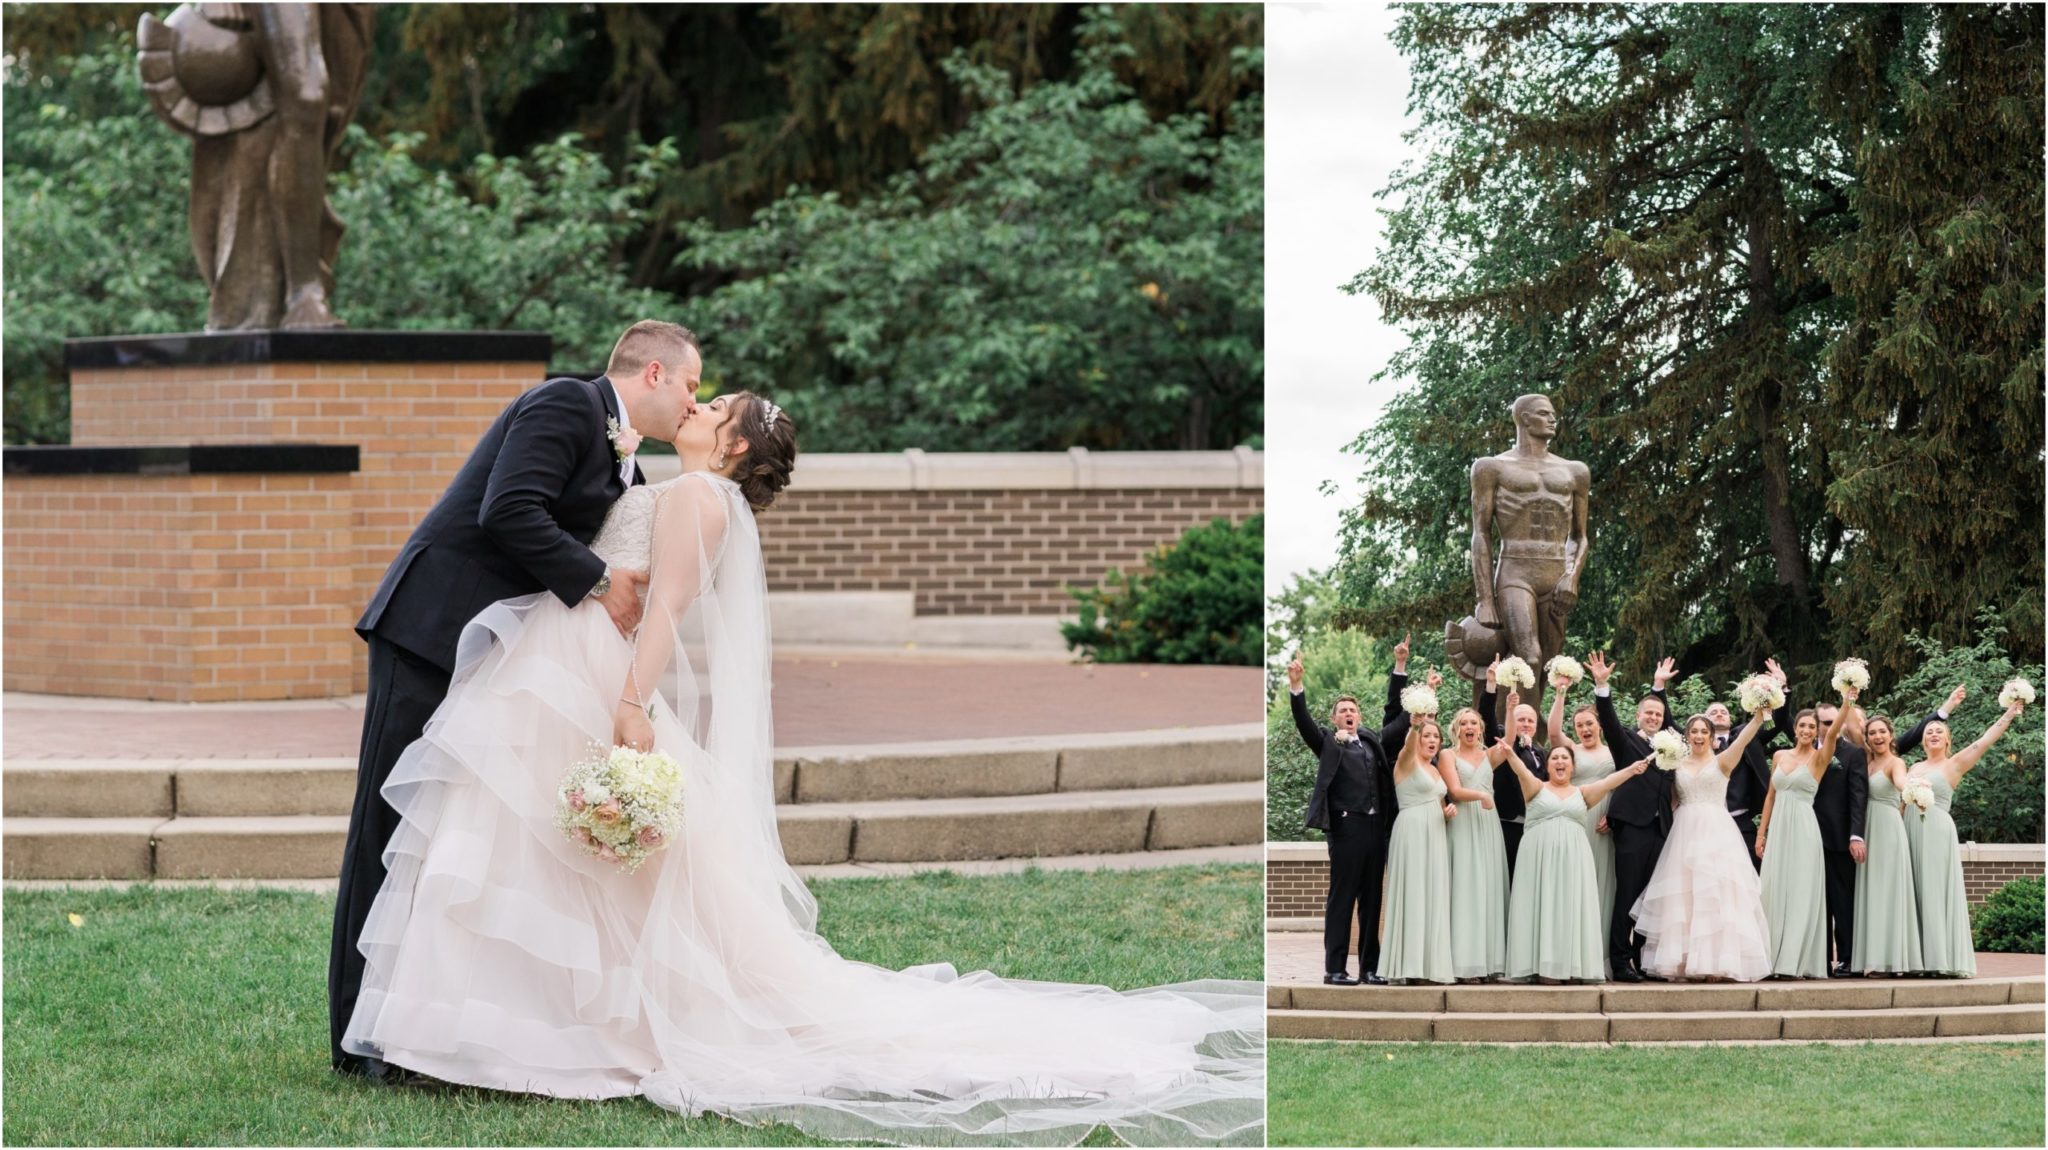 bridal party photos at sparty on msu campus in east lansing, michigan